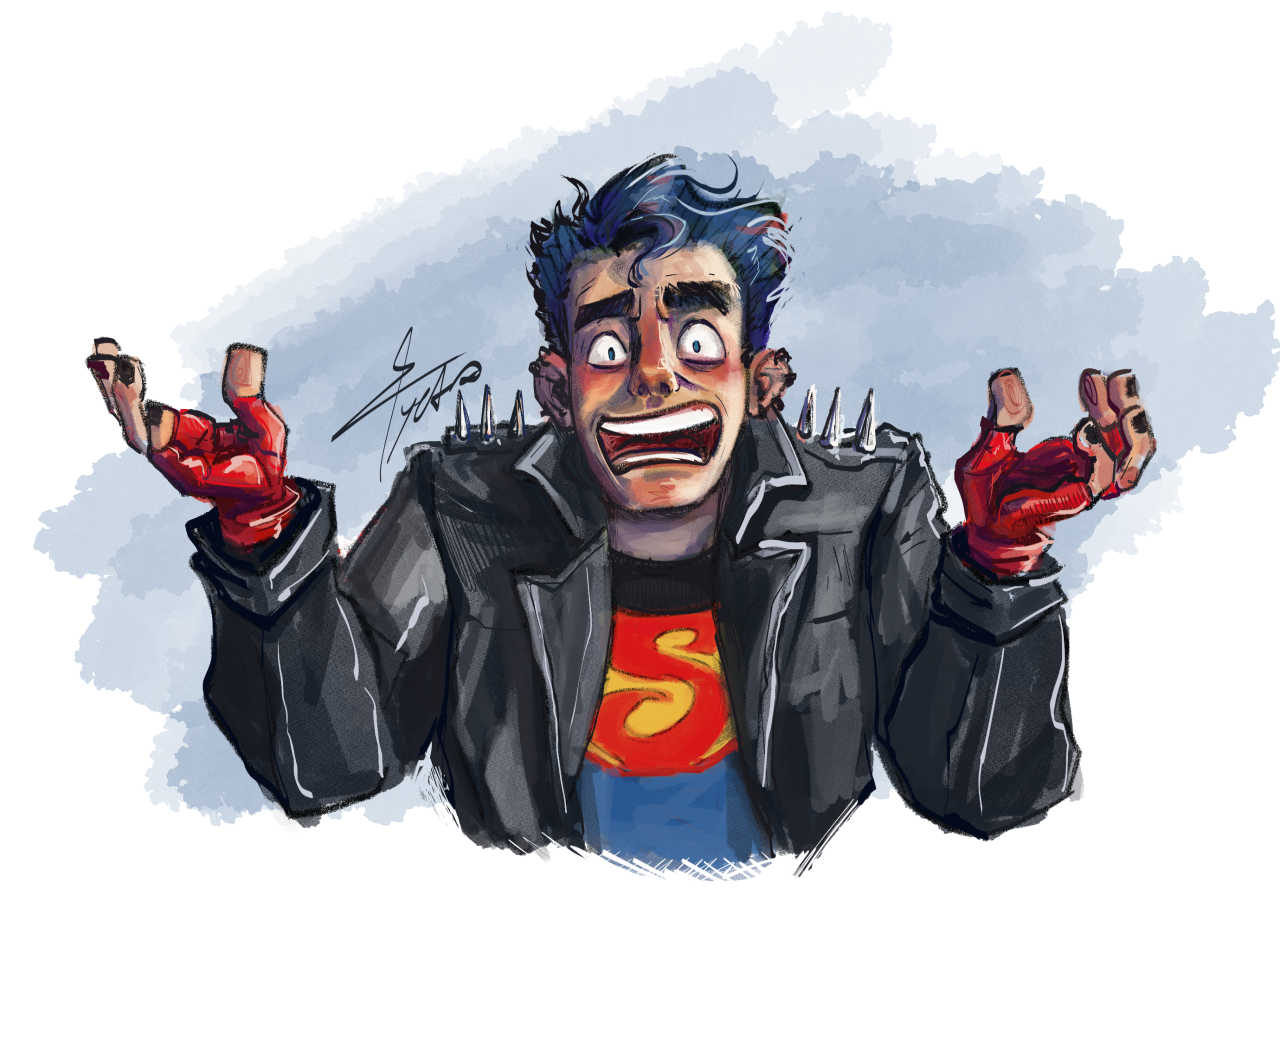 Waist-up painted drawing of Kon-el with his arms slightly raised and a distraught expression